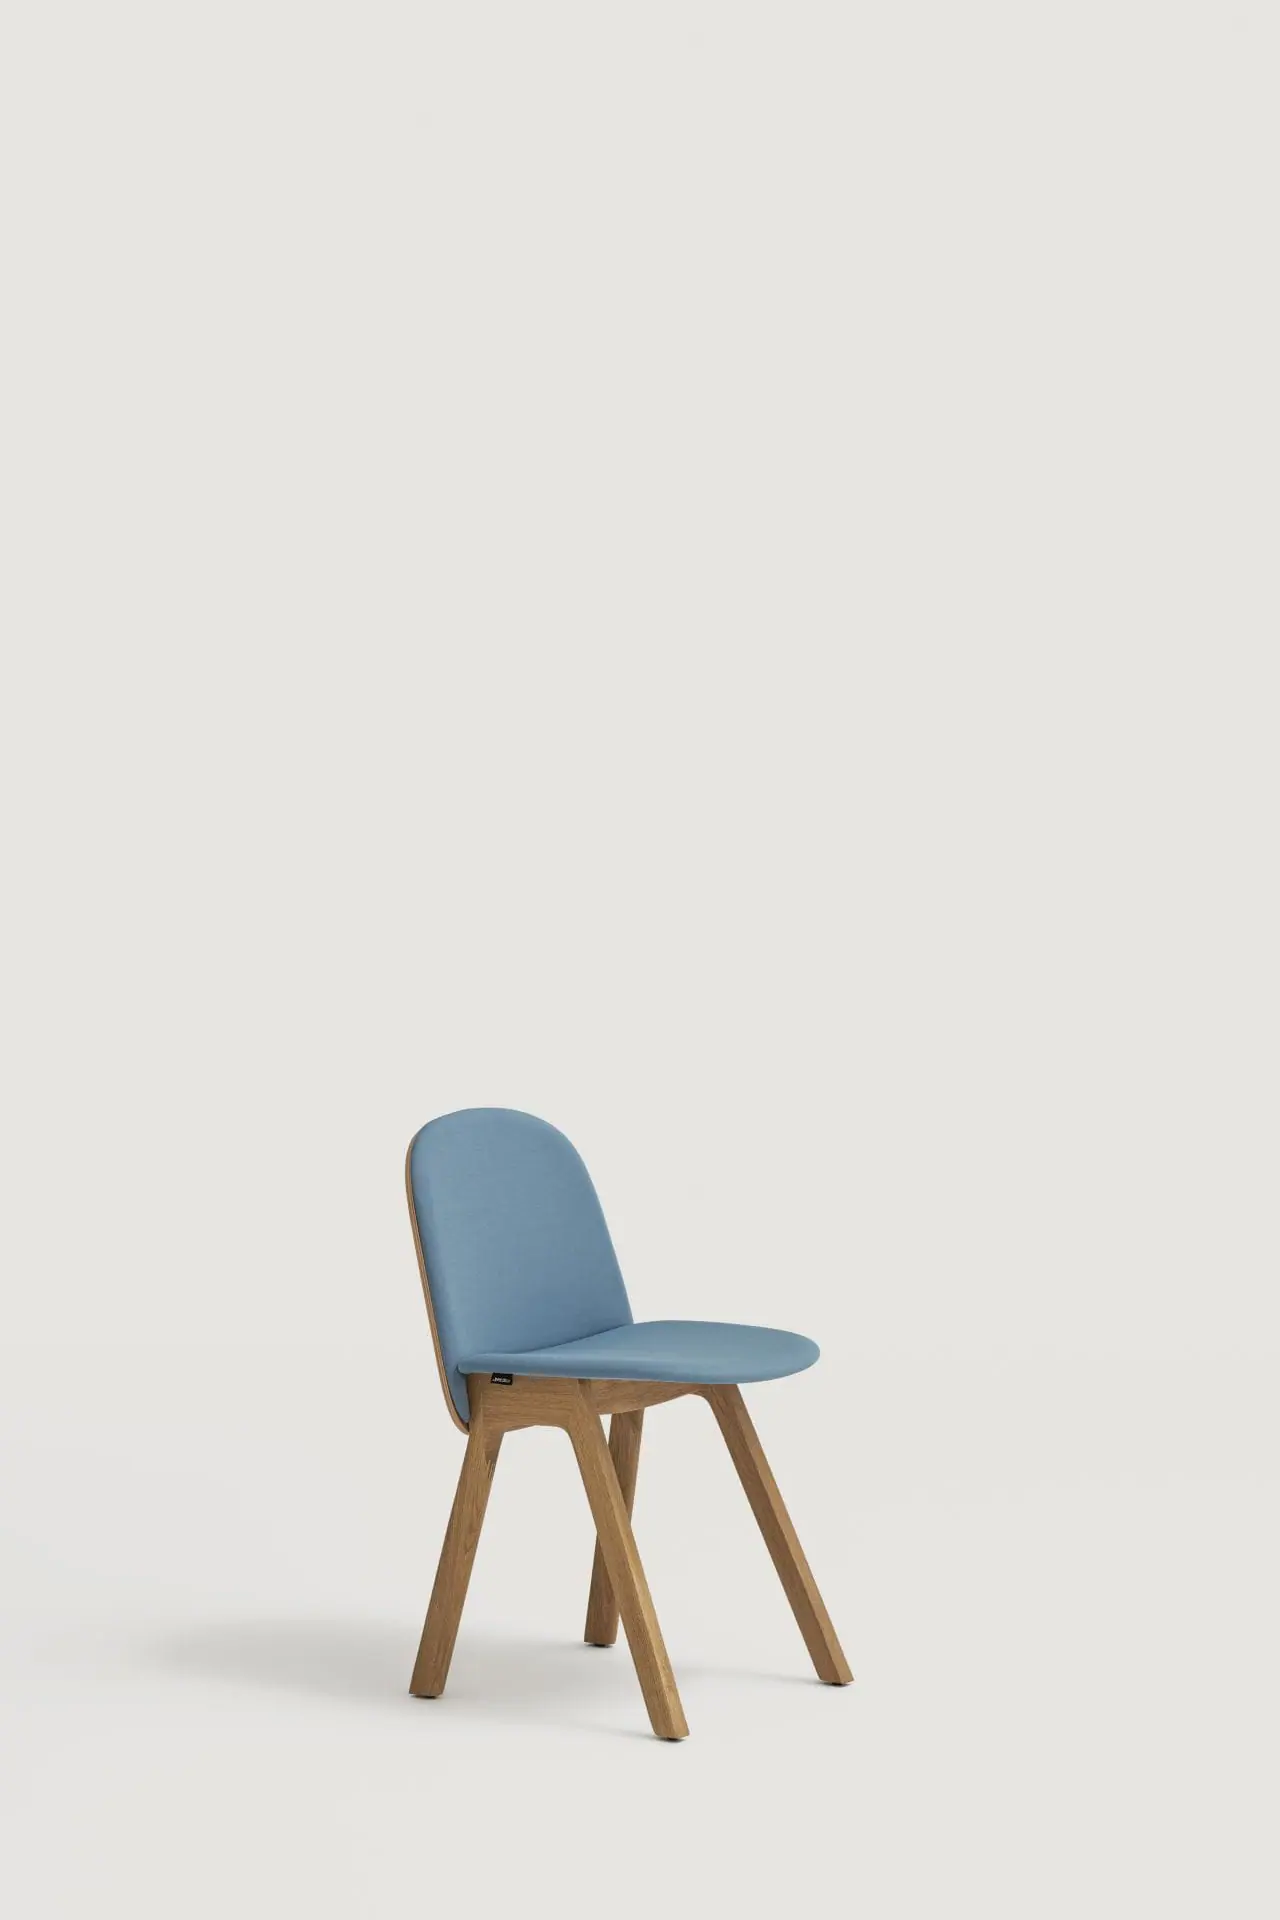 capdell-wedge-chair-03